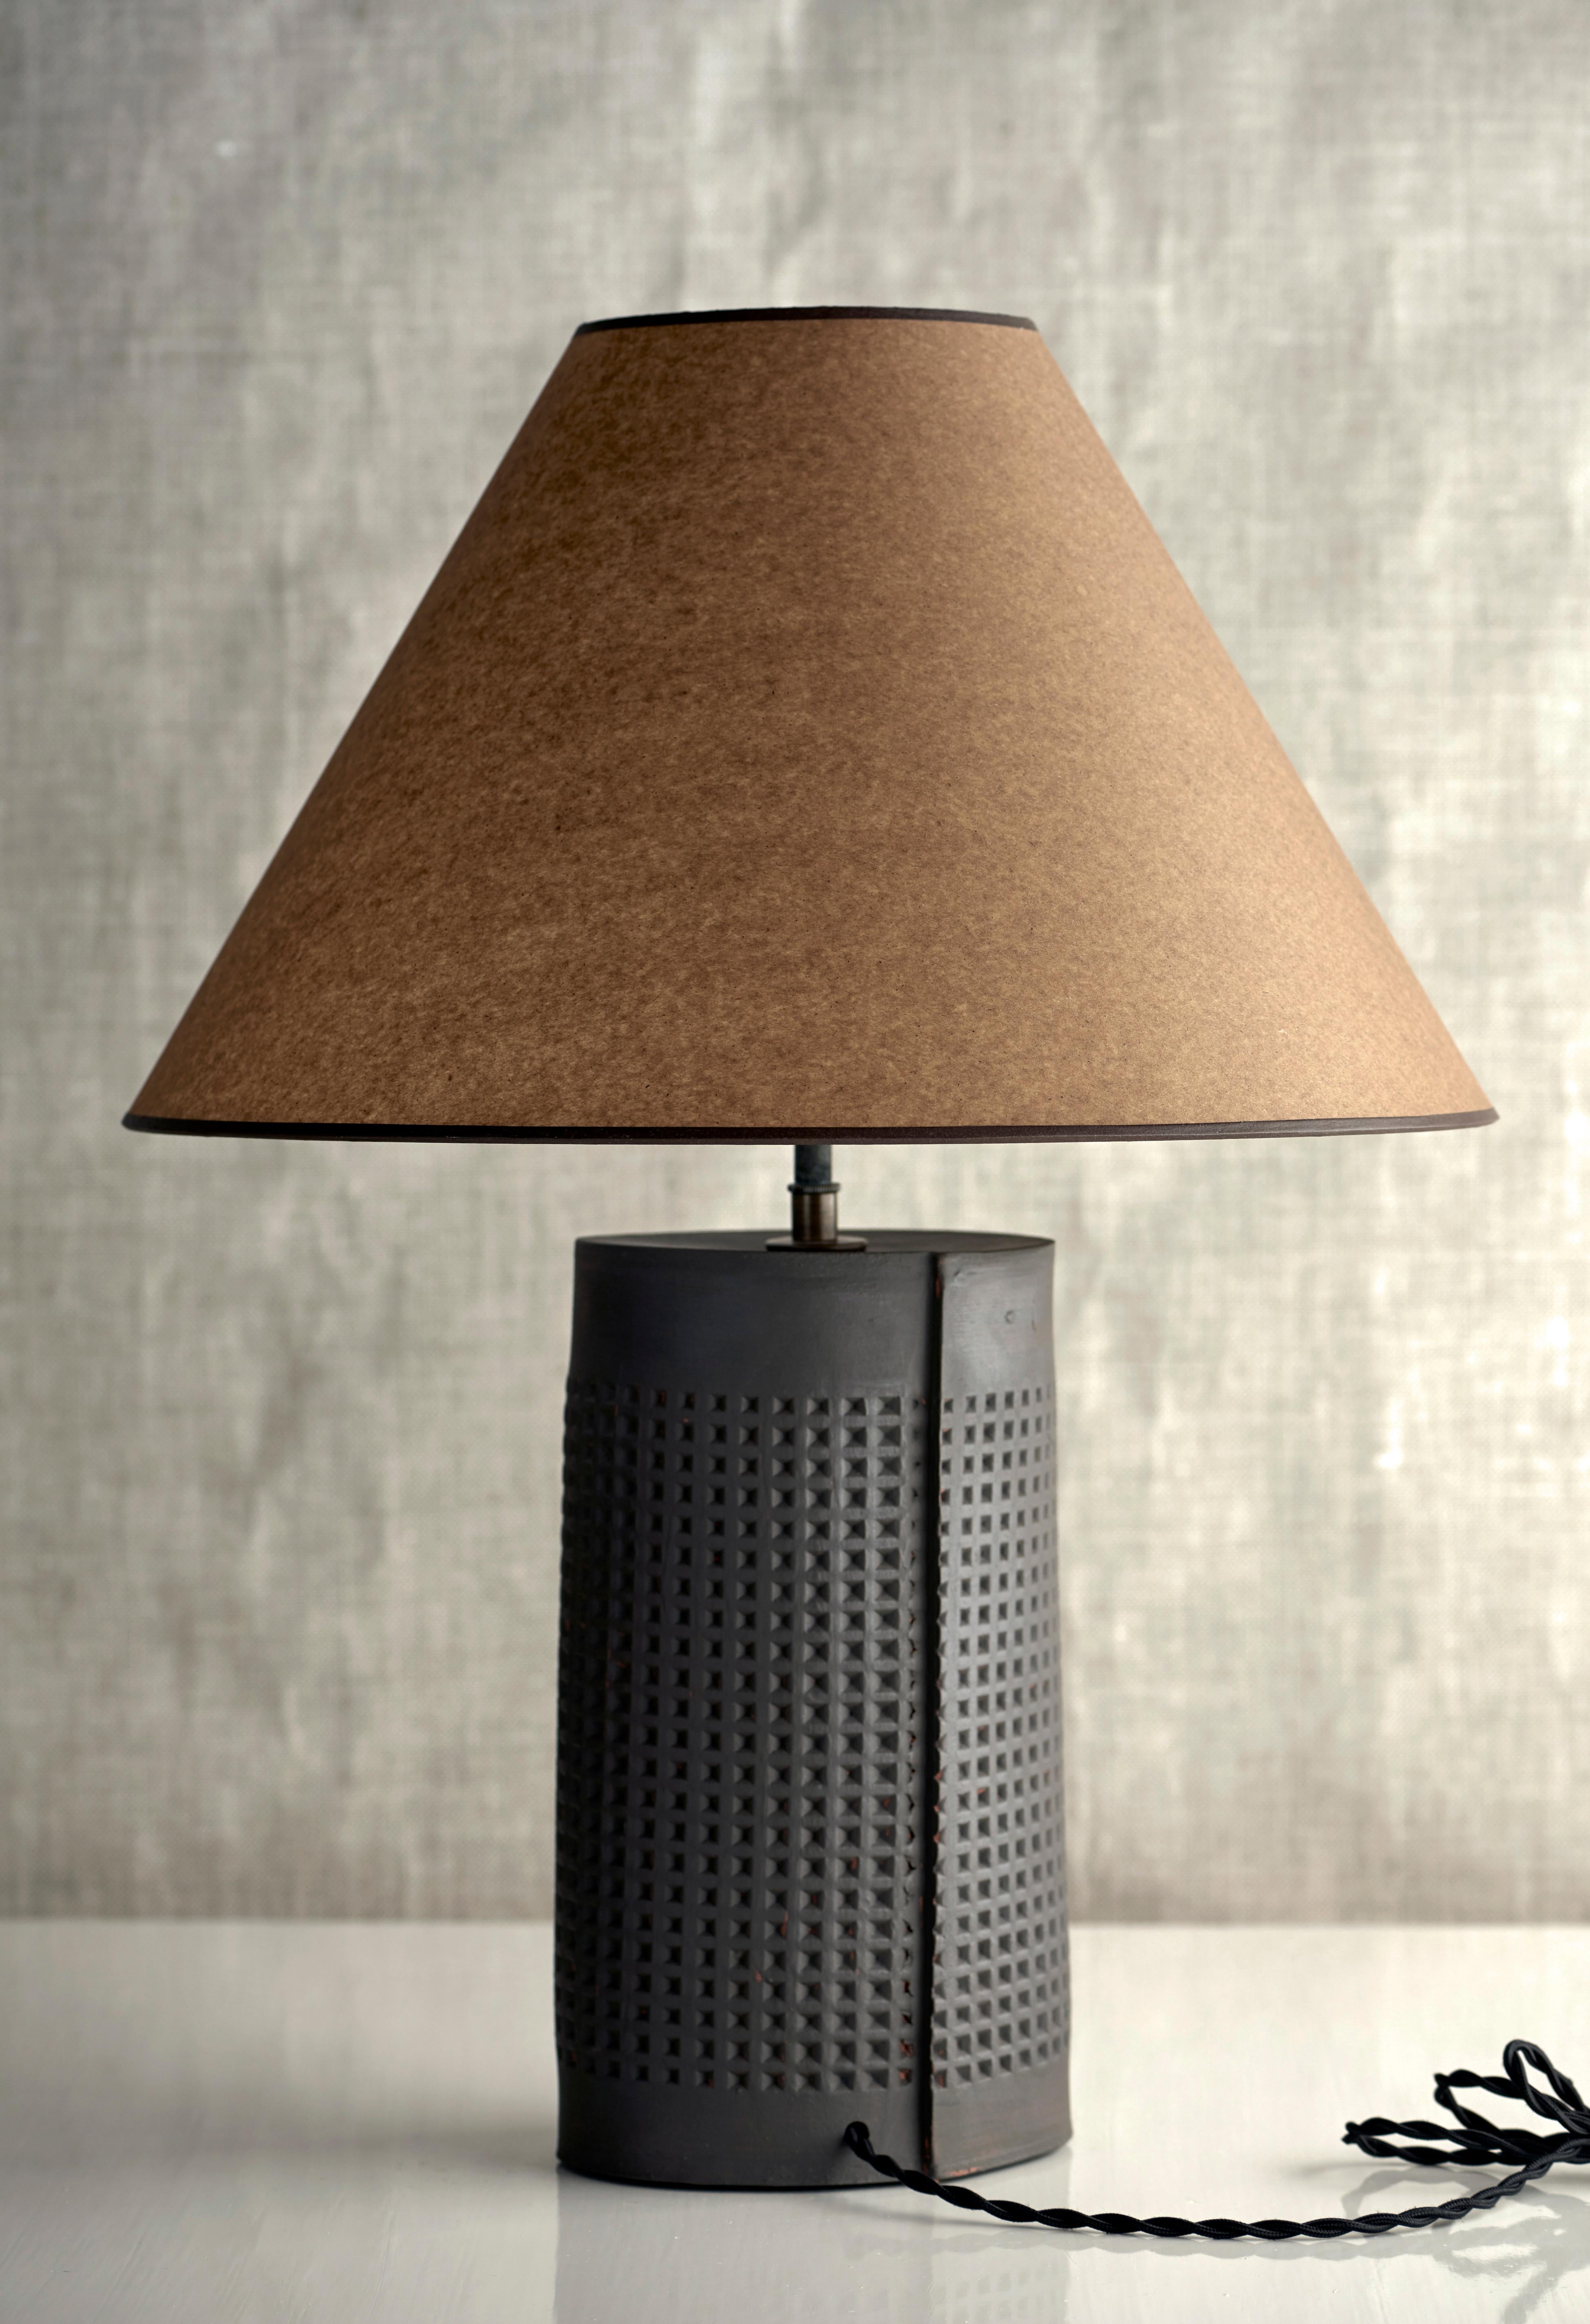 Description

Handmade Terracotta slab construction. Lamps are individually crafted and one of a kind.

Finish

Black Terra Sigillata glaze. Antique brass fittings, dimmer switch on socket. Braided black cloth cord and Kraft paper